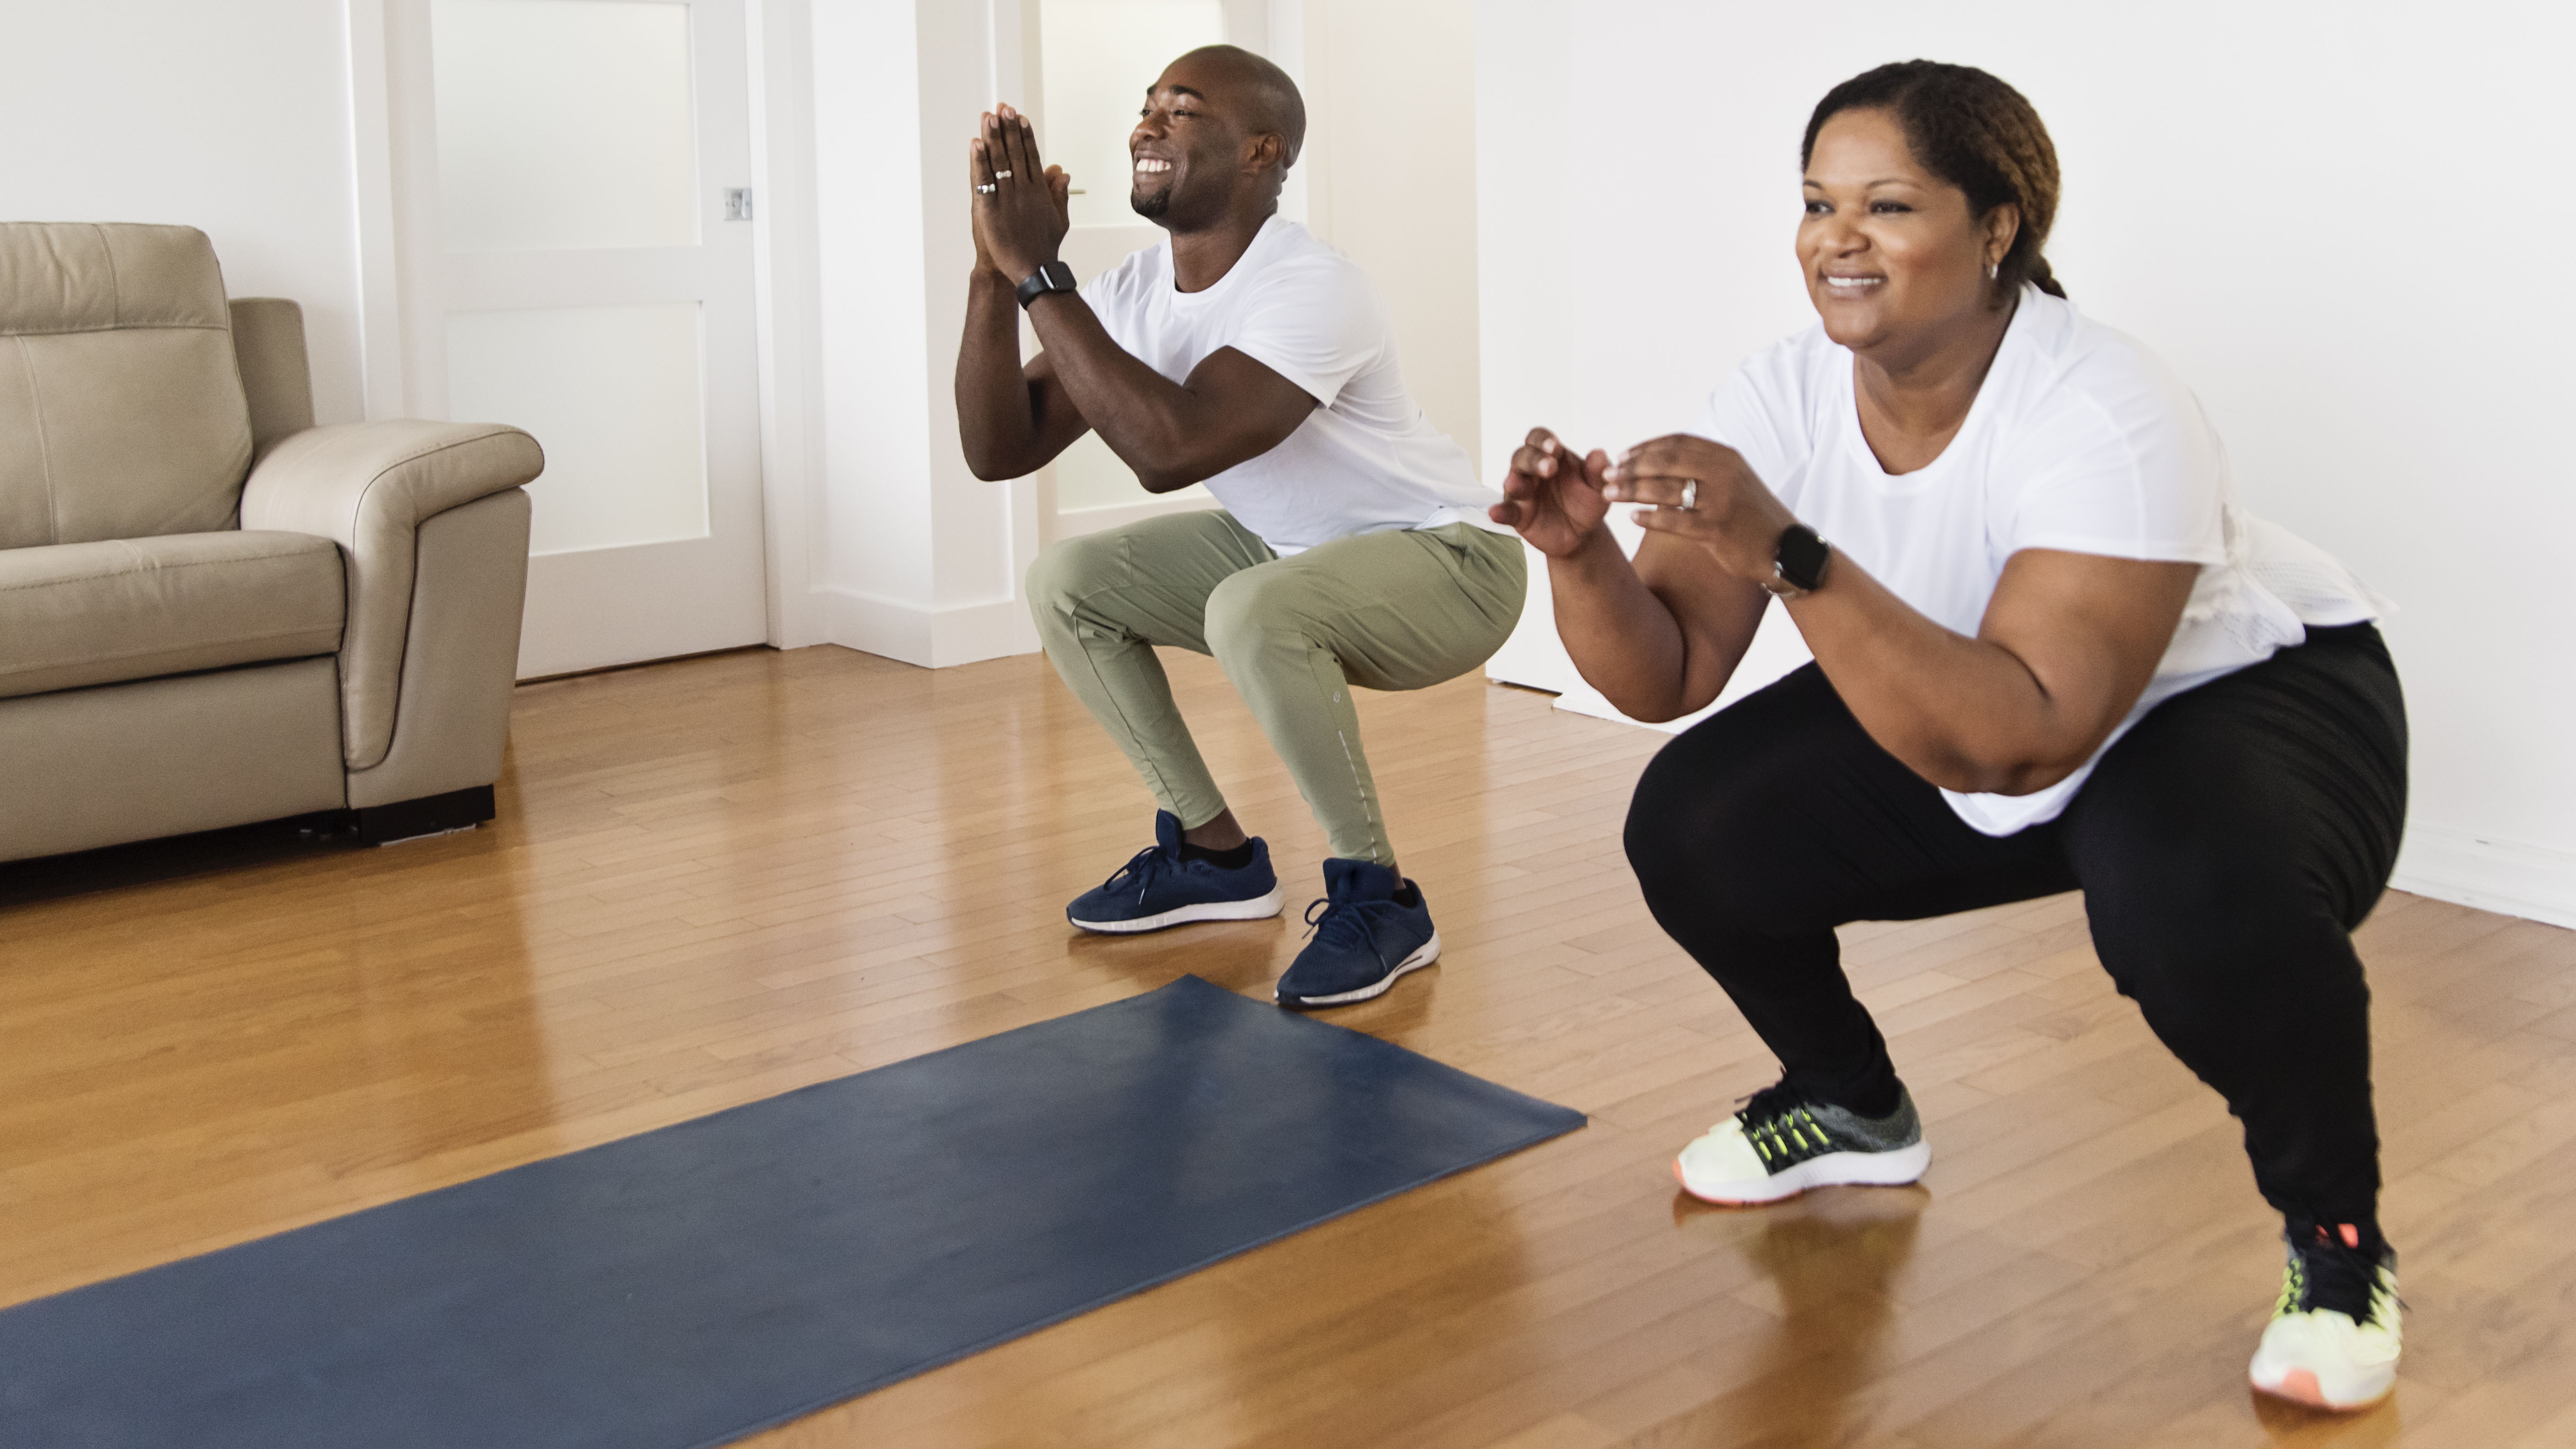 The couple performs a bodyweight squat to activate the gluteal muscles